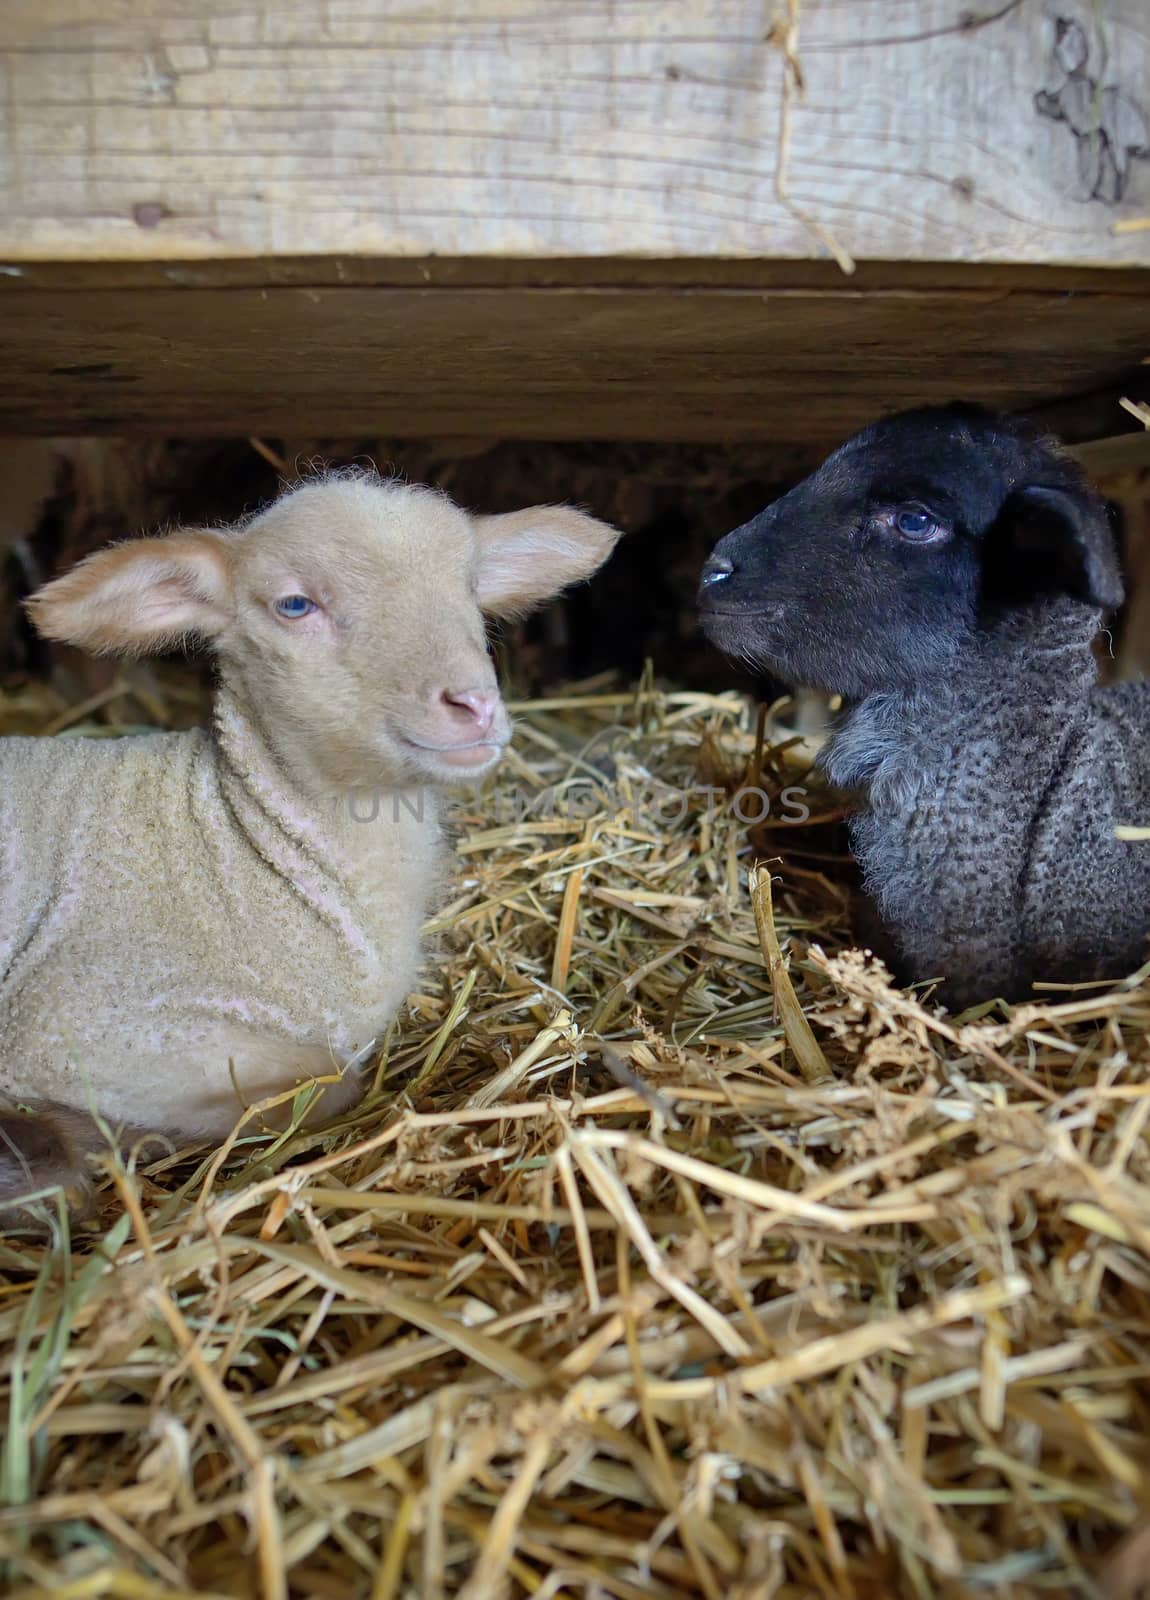 Black and white baby lambs in a stable